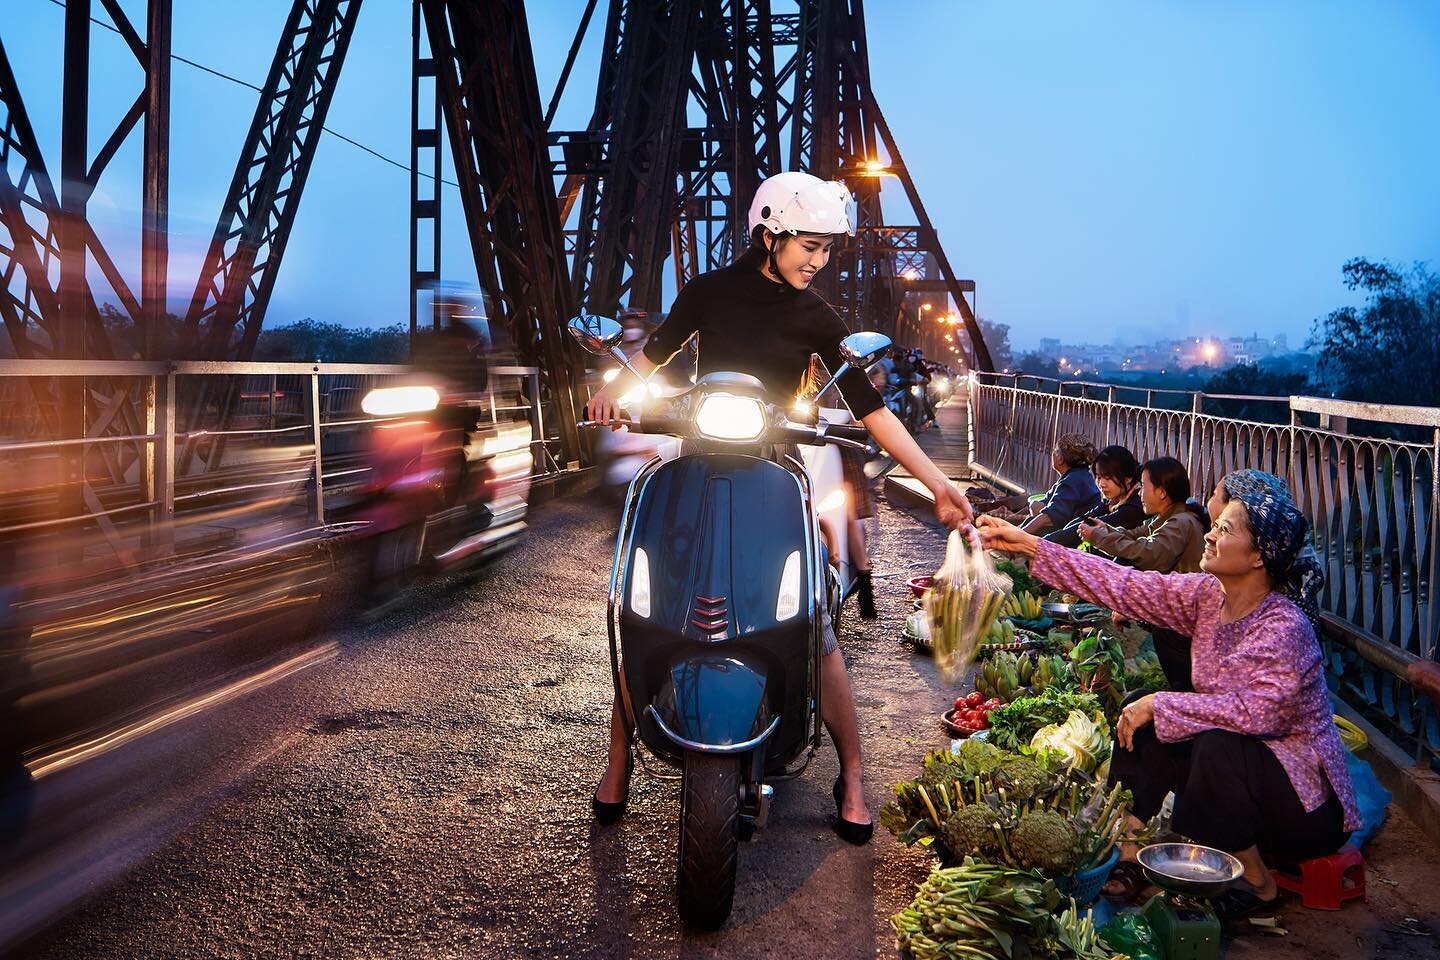 One of my favourite images from a lifestyle shoot that I did earlier this year for a financial technology company whom were looking for real life images depicting transactions and payment solutions.  It&rsquo;s taken on the Hanoi&rsquo;s Long Bien Br